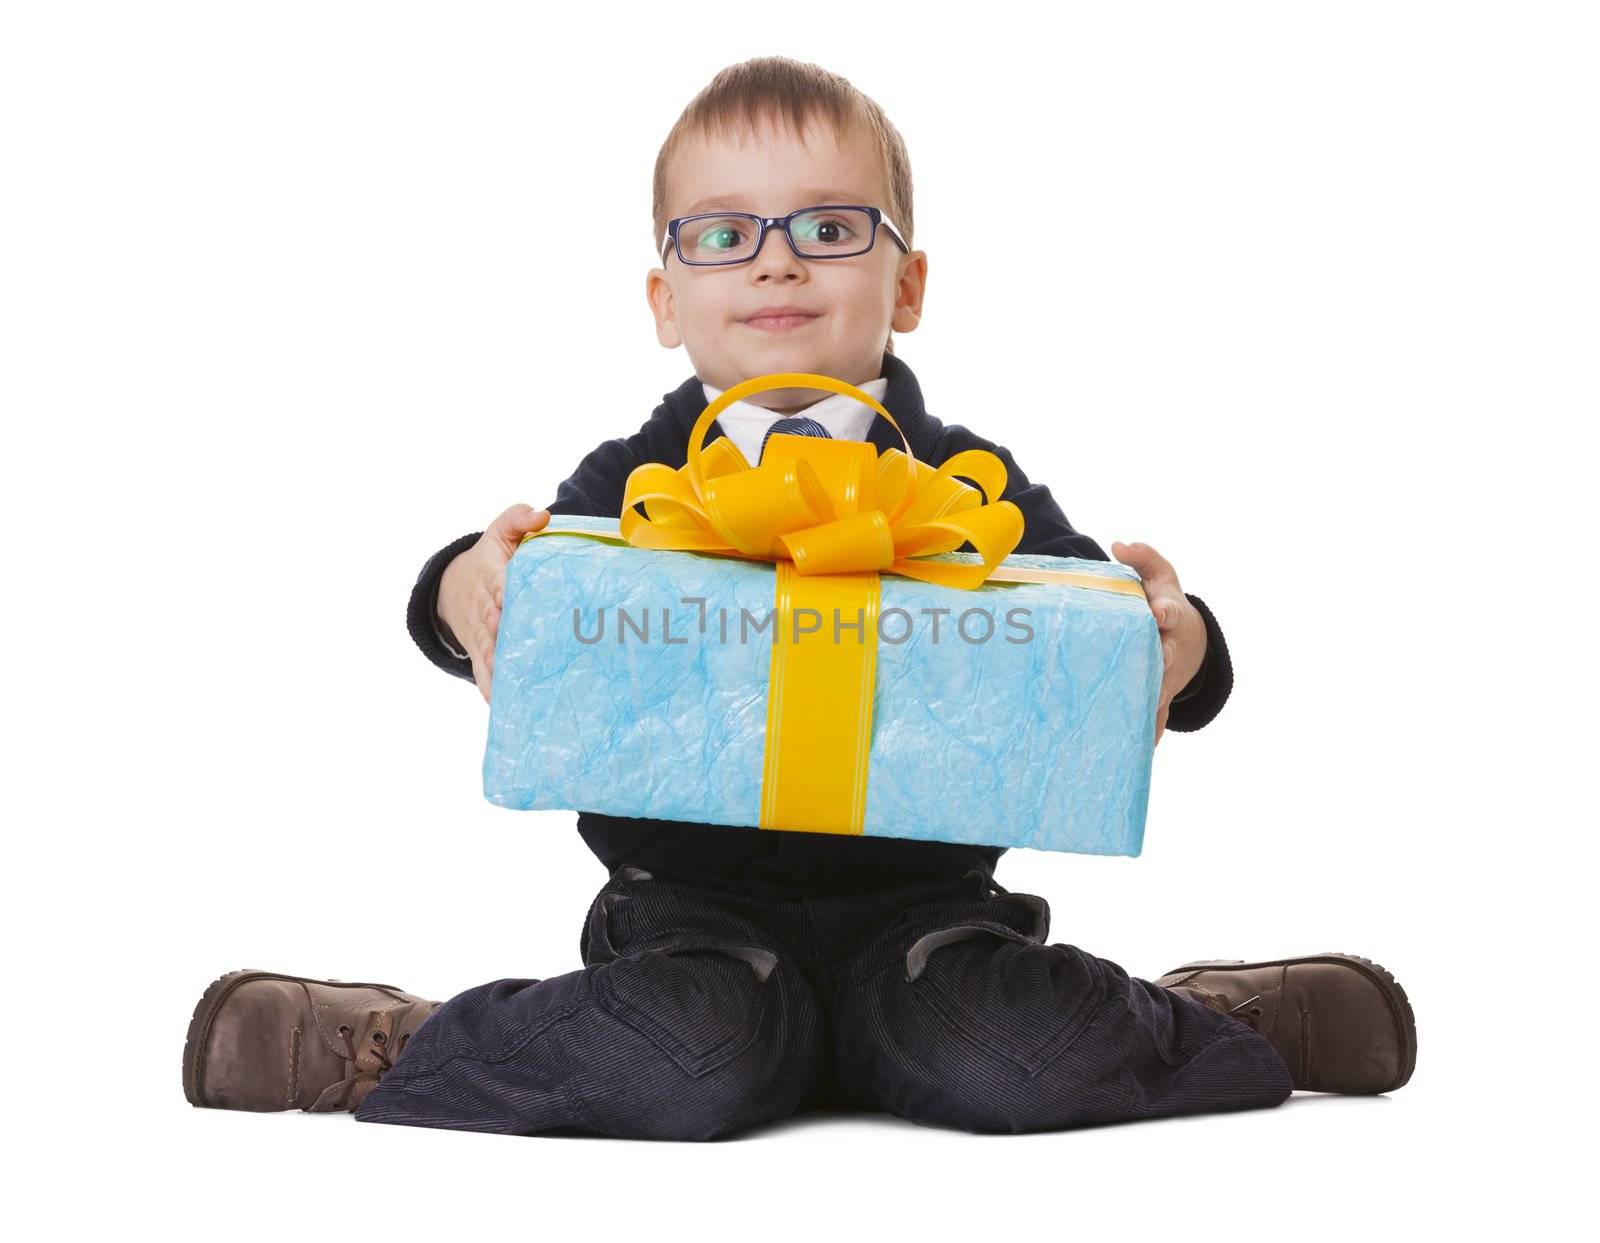 Small sitting boy in spectacles holds a big blue present on white background